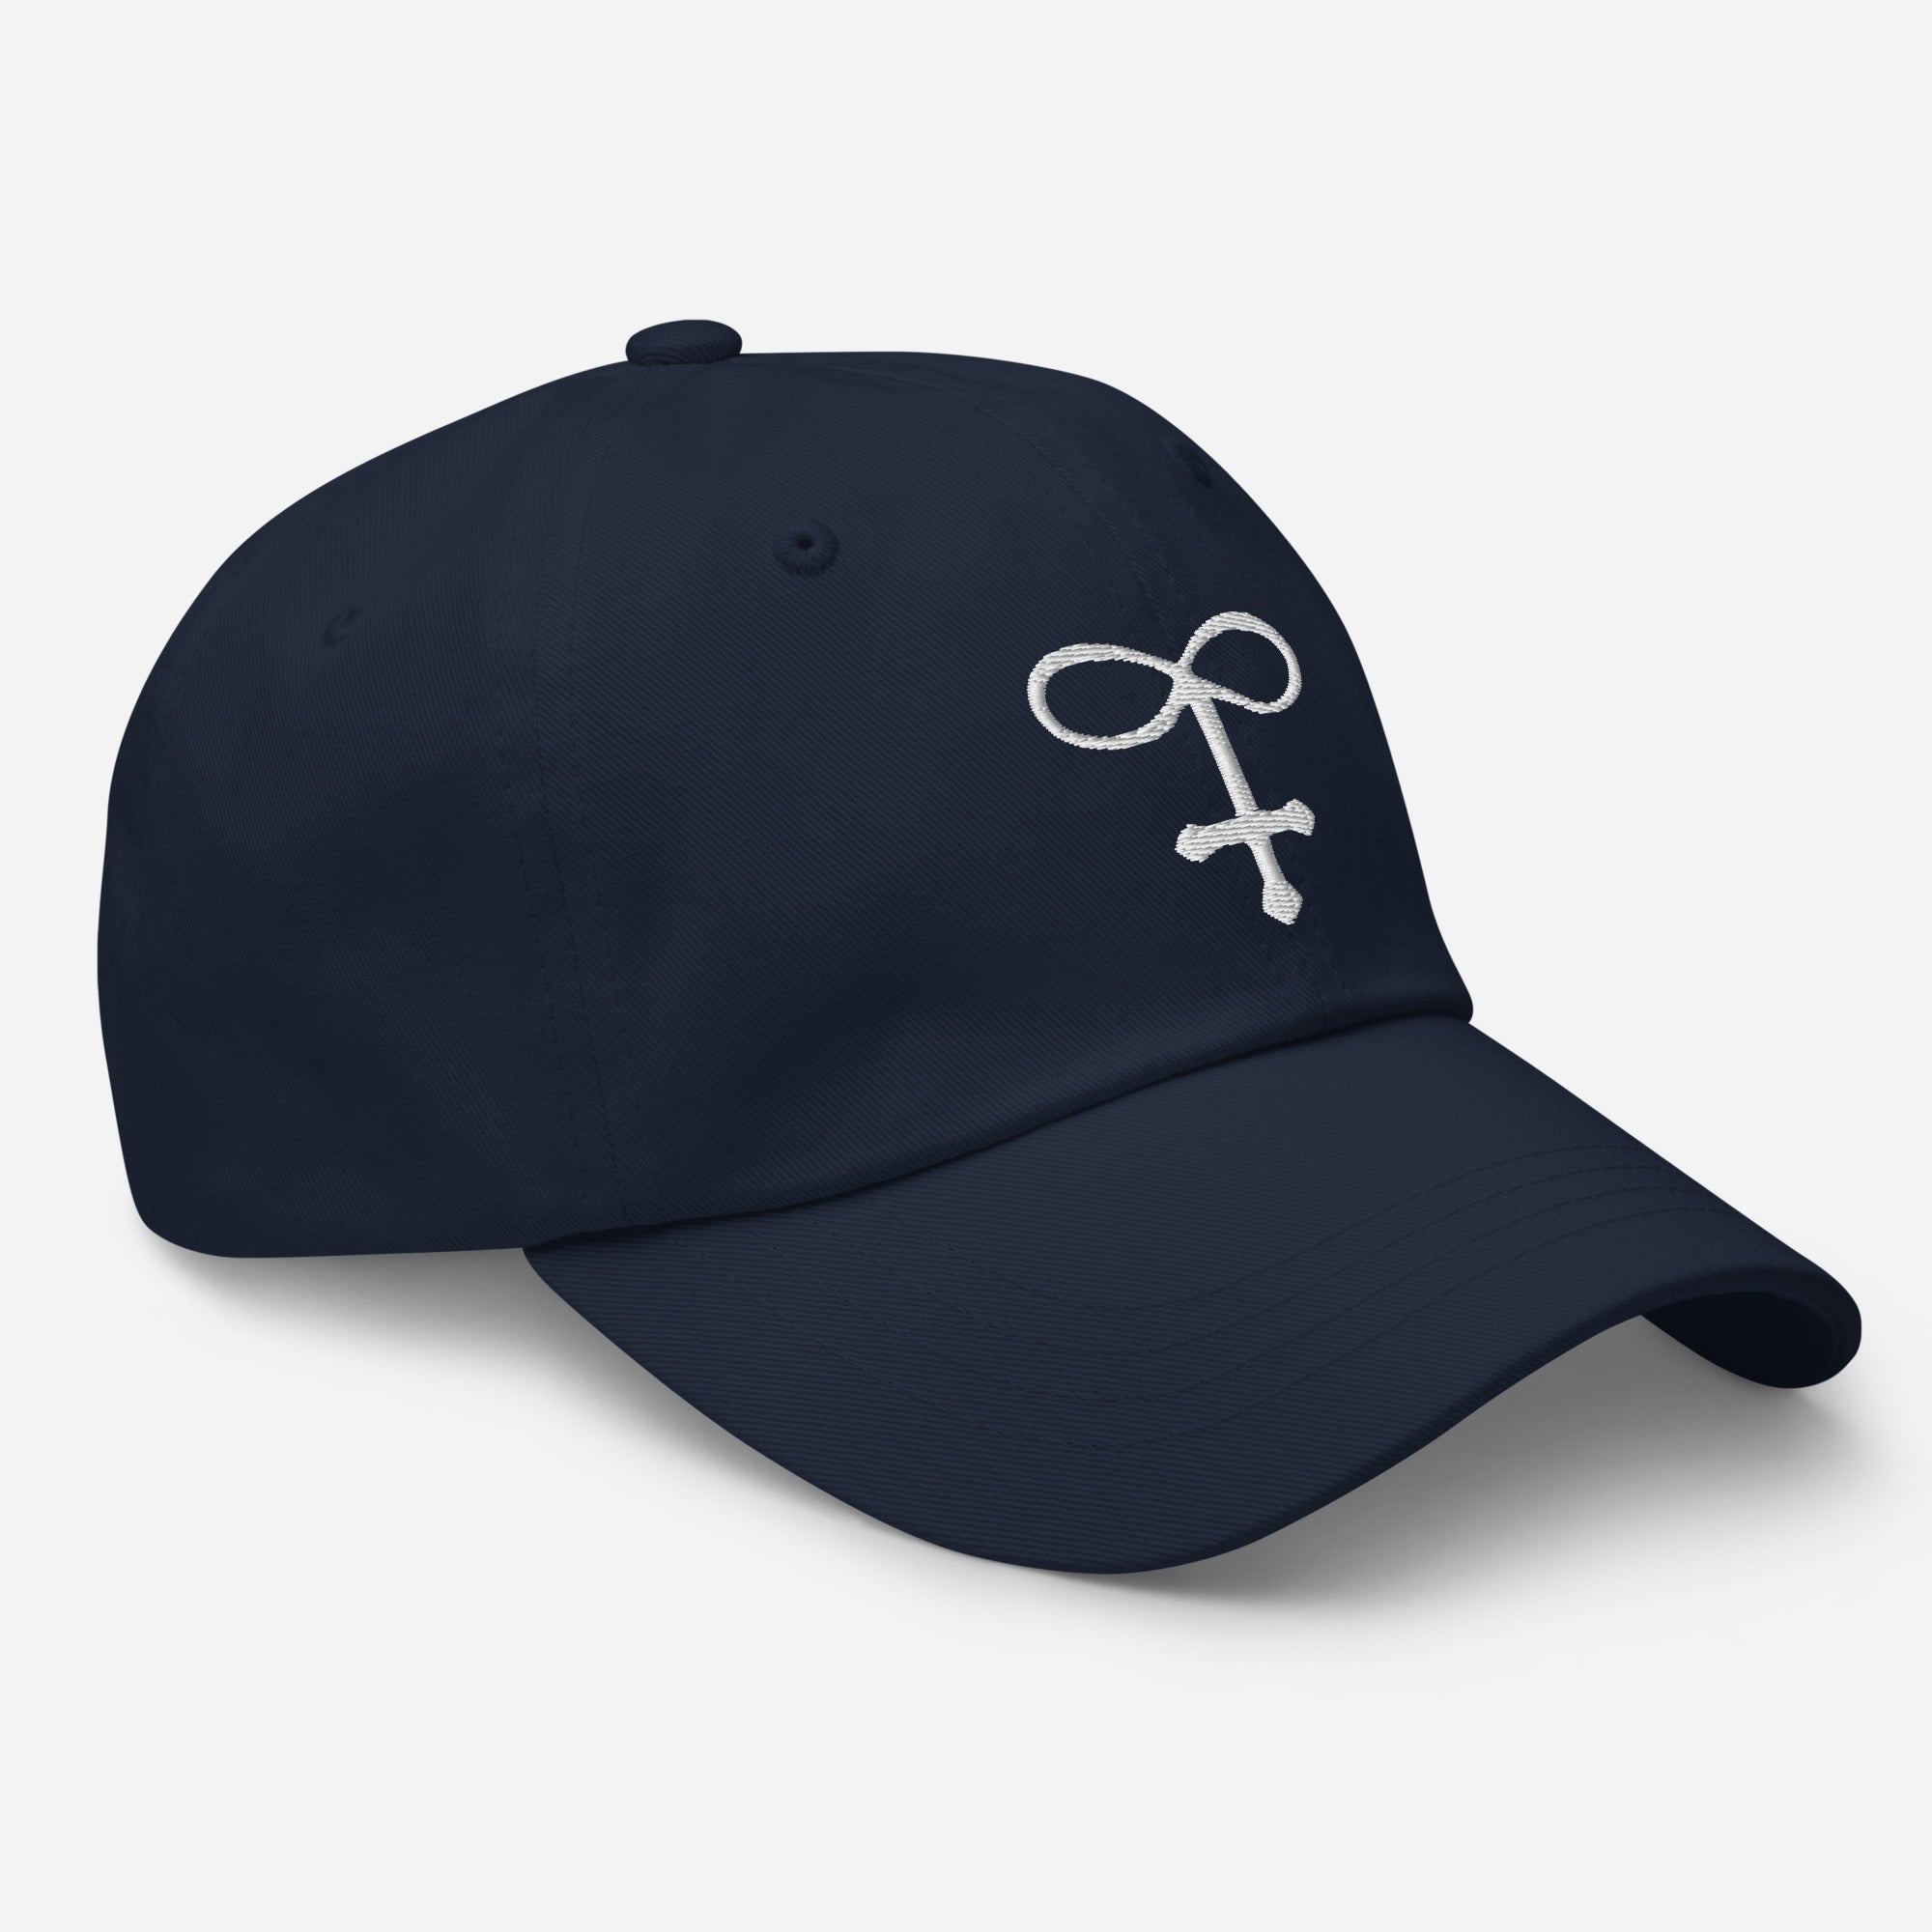 Alchemy Glass Occult Symbol Embroidered Baseball Cap Dad hat